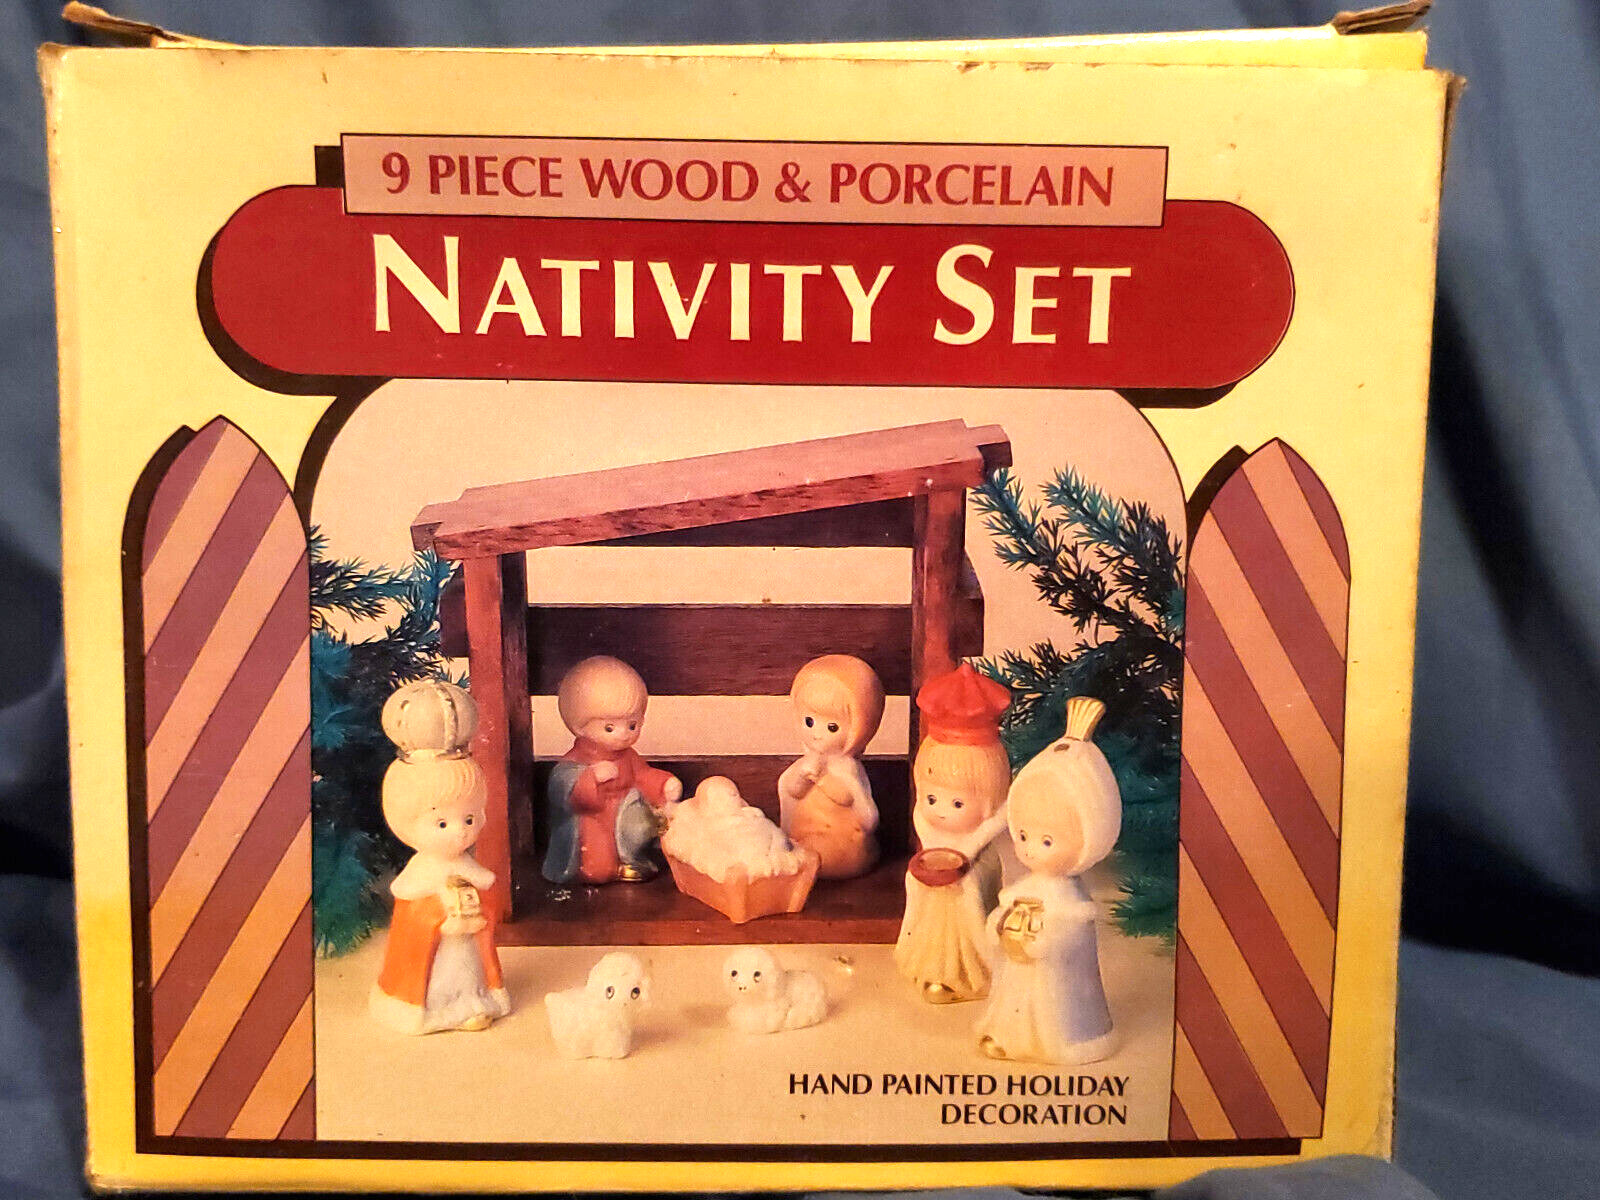 Vintage 1970's 9pc Nativity Set Wood Porcelain Hand Painted New In Box - GiftCo